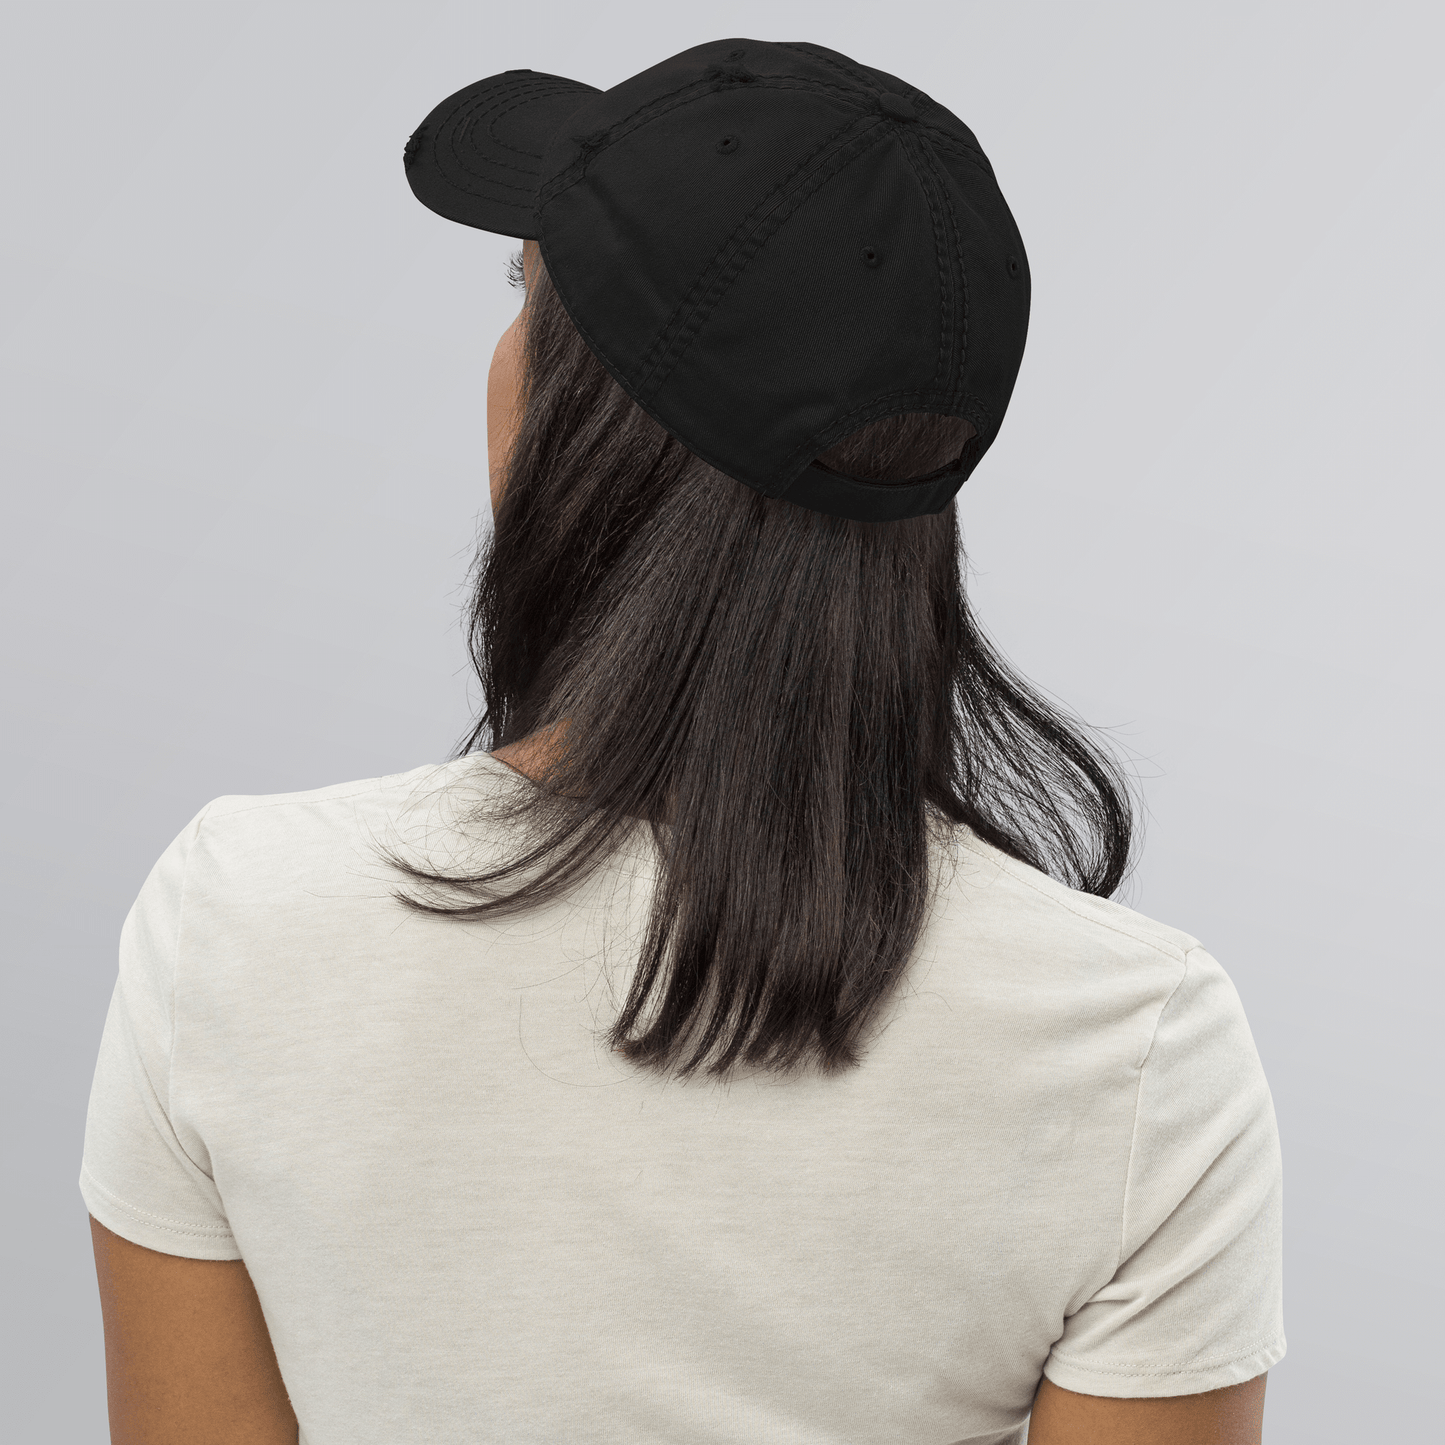 Life Happens Wine Helps Dad Hat - Add Edge to Your LookElevate your style with our "Life Happens Wine Helps" Dad Hat. Perfect for any occasion, blending humor and style. Ideal for drinking enthusiasts.